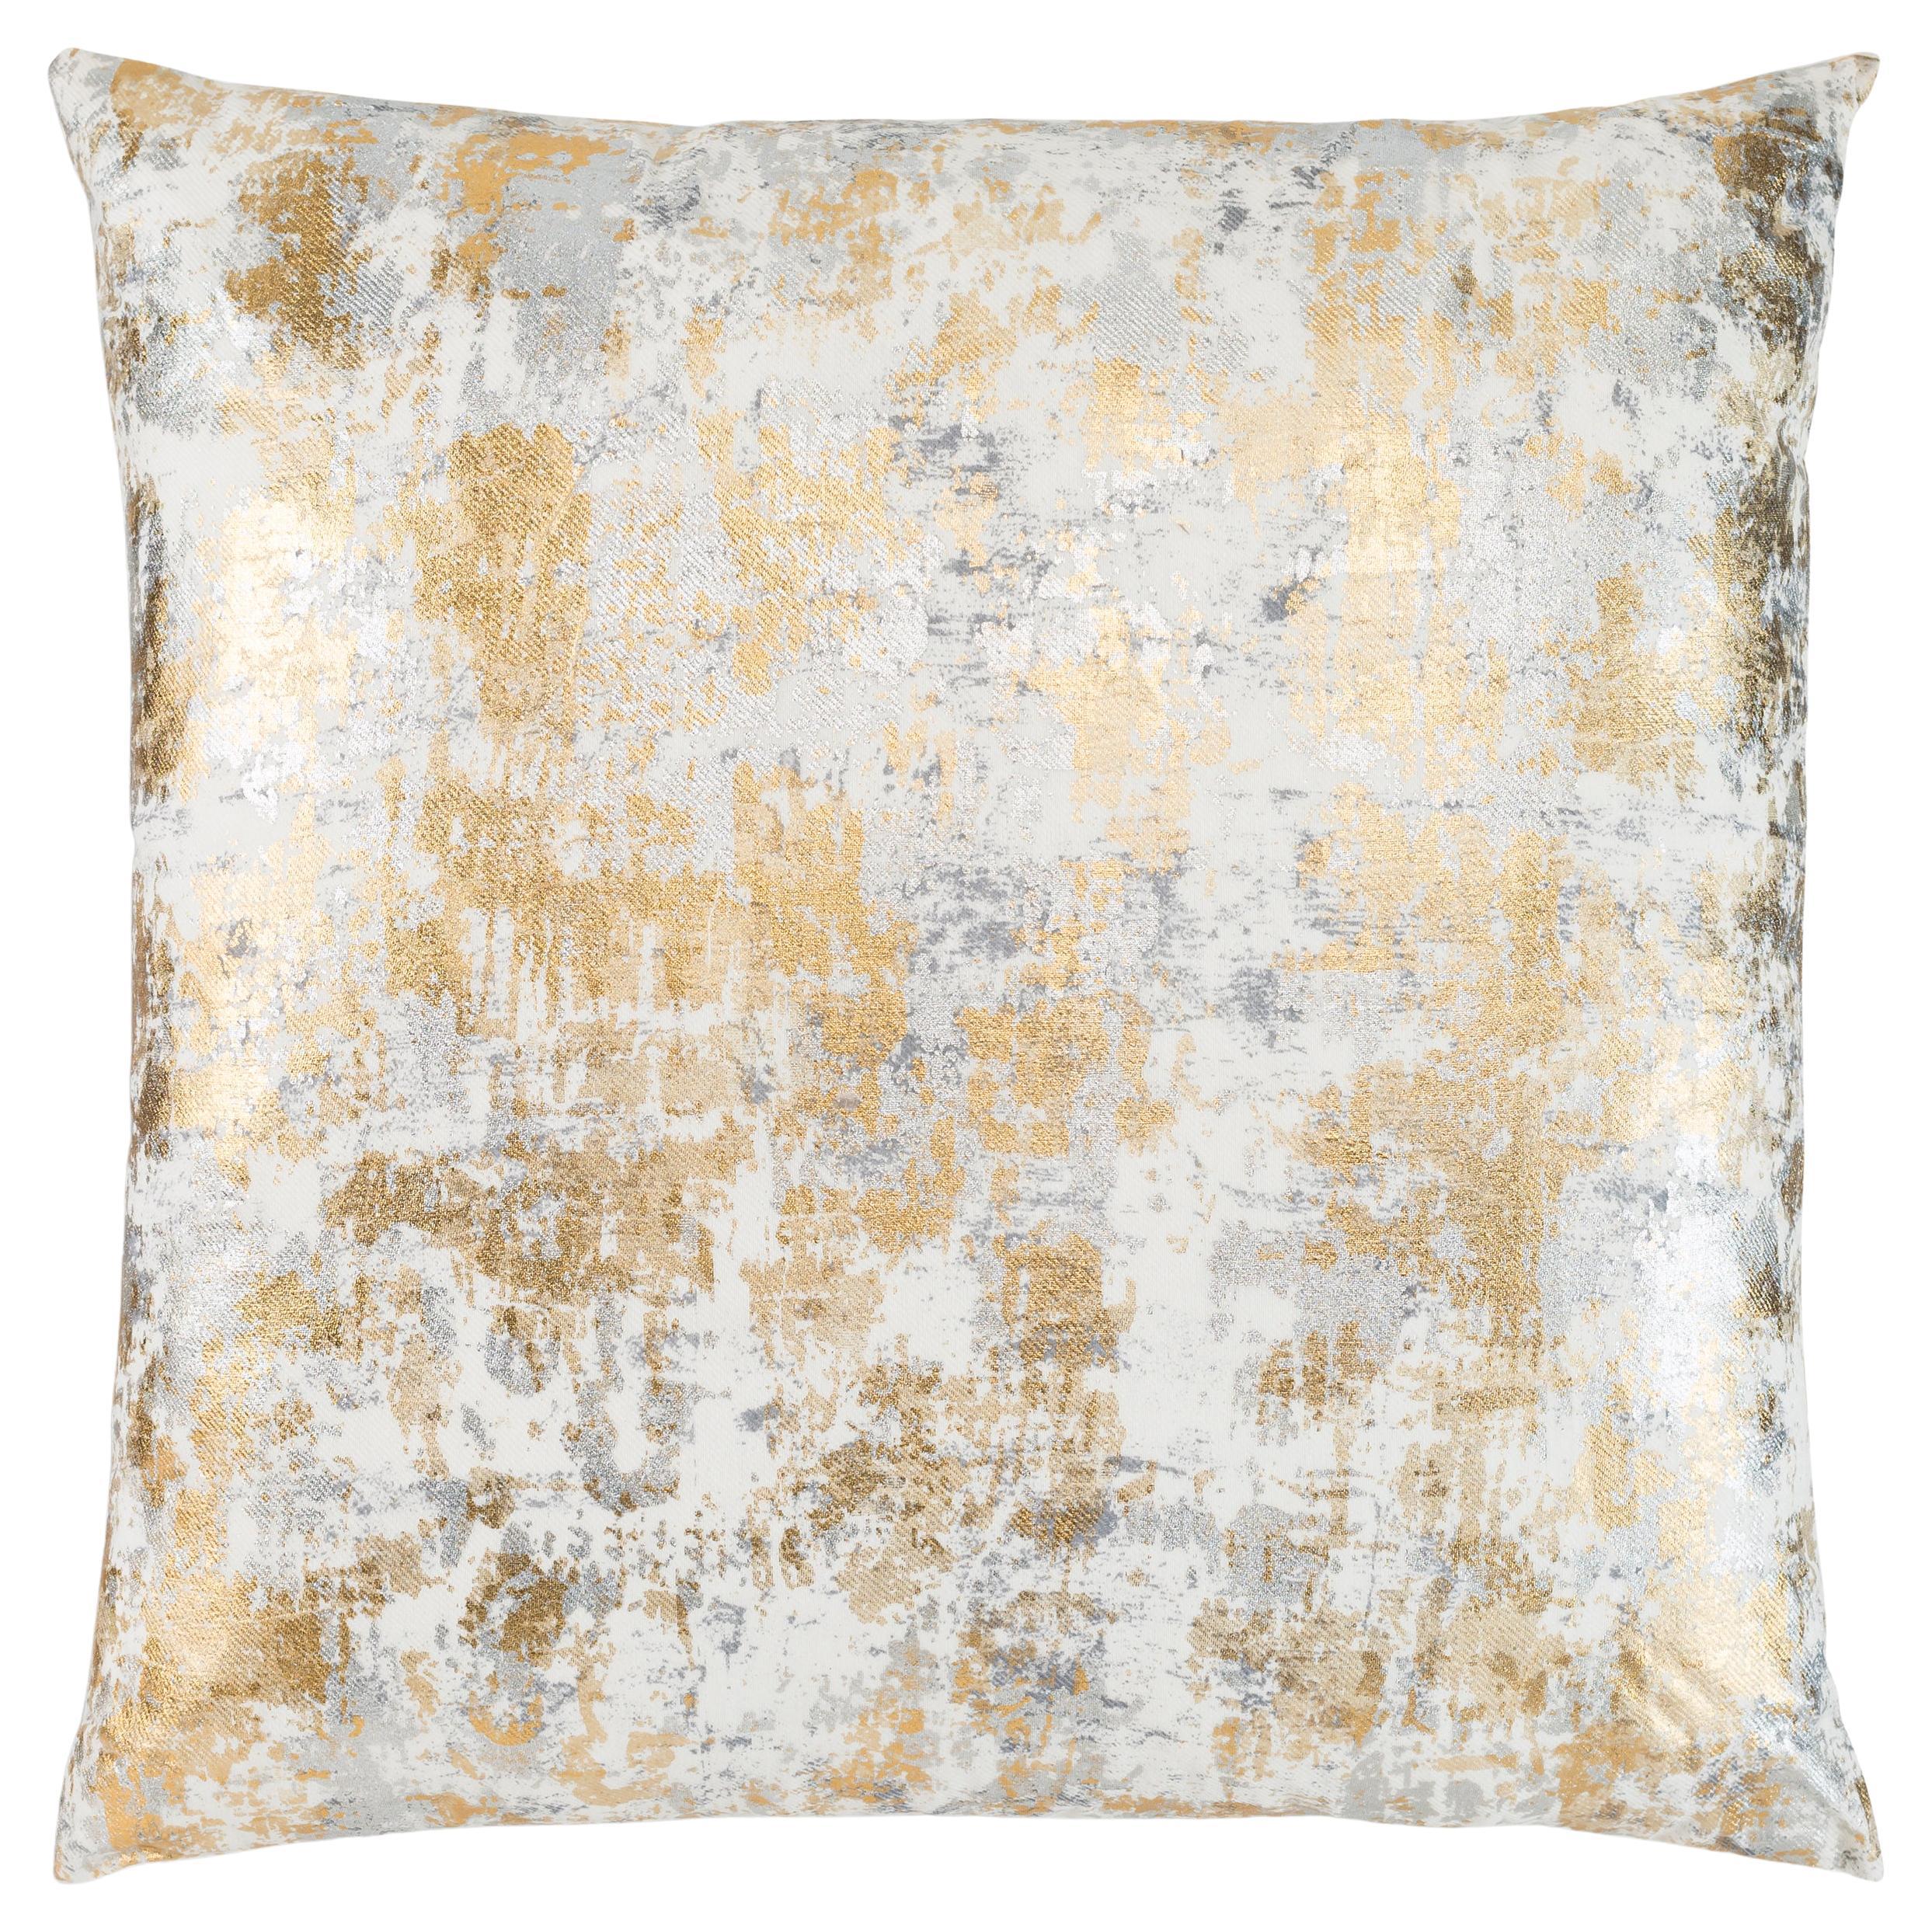 Sona Pillow, Gold Silver For Sale